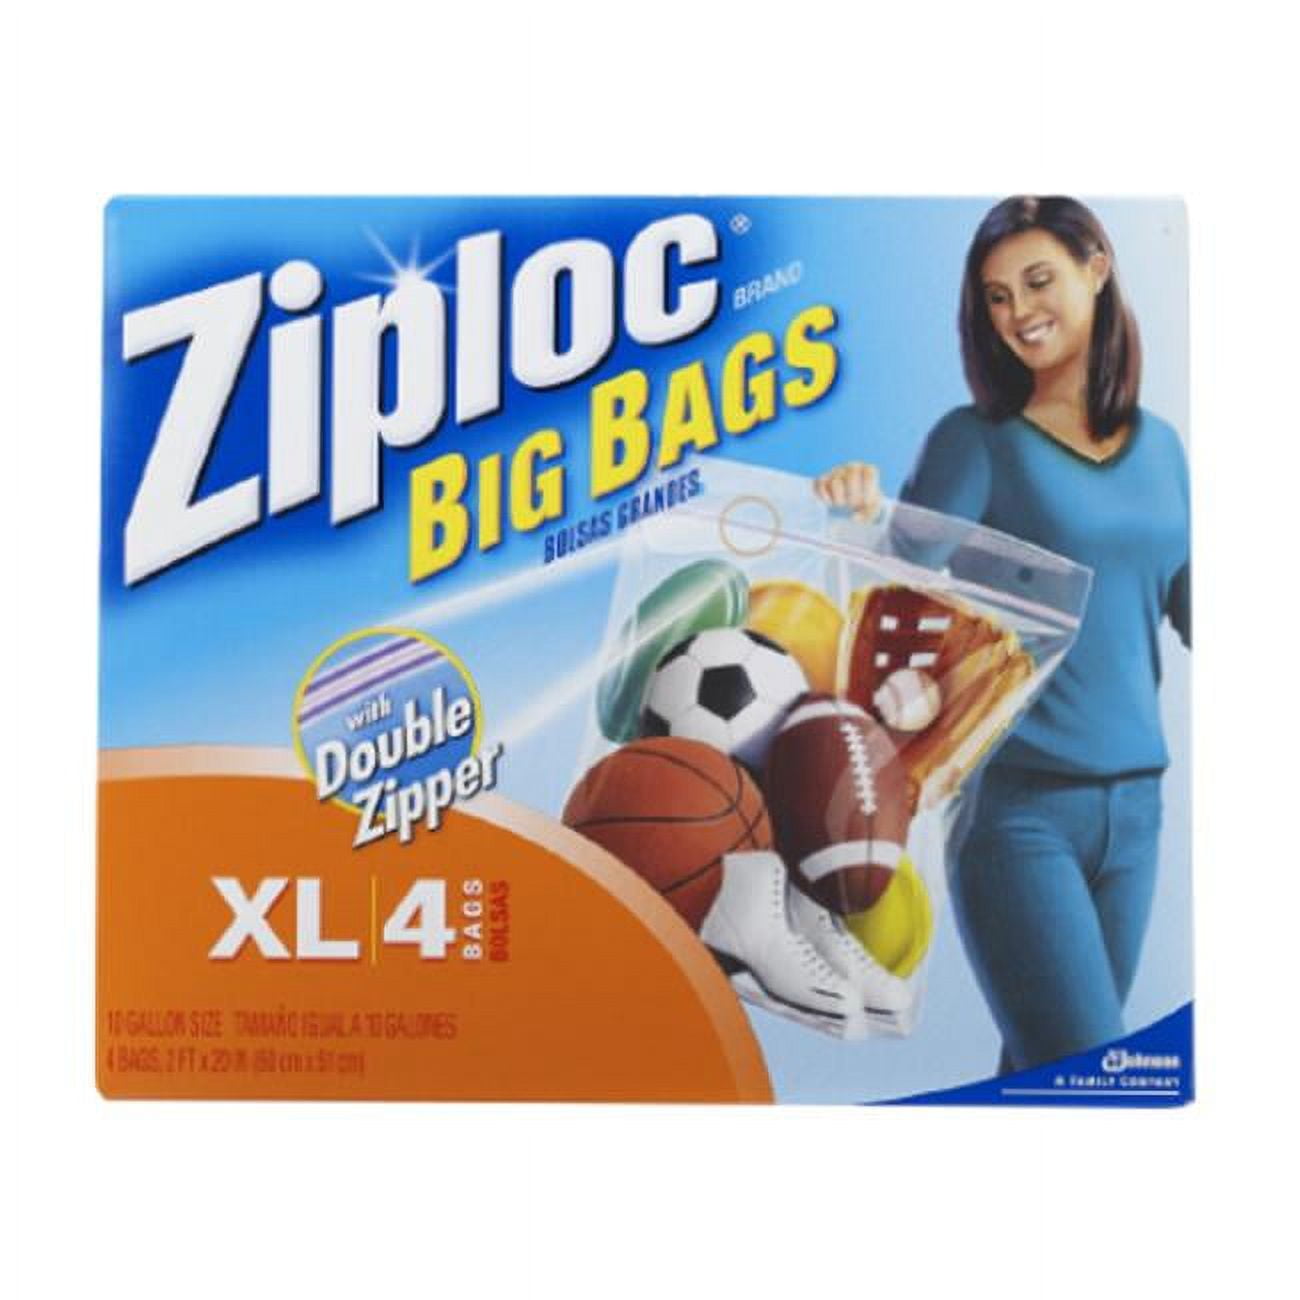  S C Johnson Wax 3 ct. Extra Large Big Bags (Pack of 4) : Health  & Household